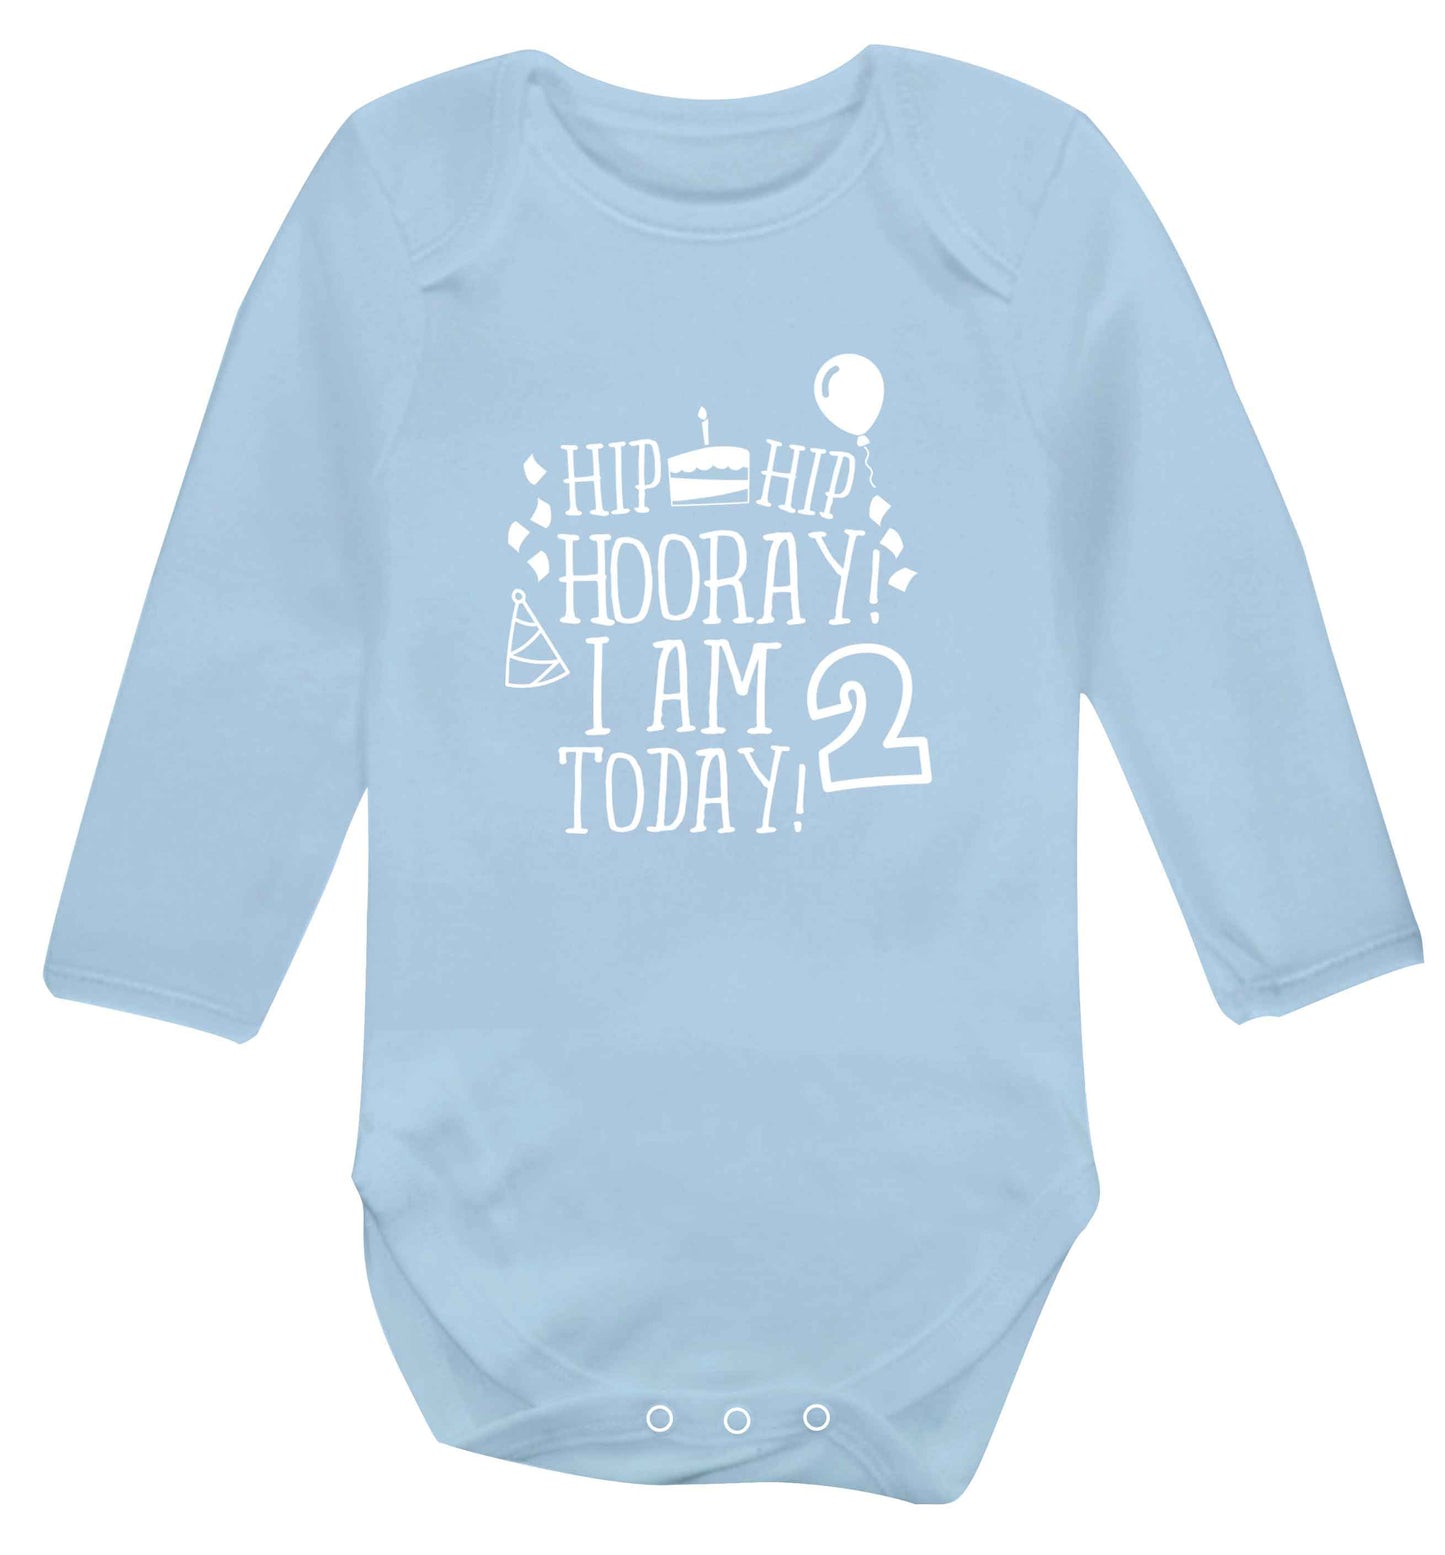 I'm 2 Today baby vest long sleeved pale blue 6-12 months